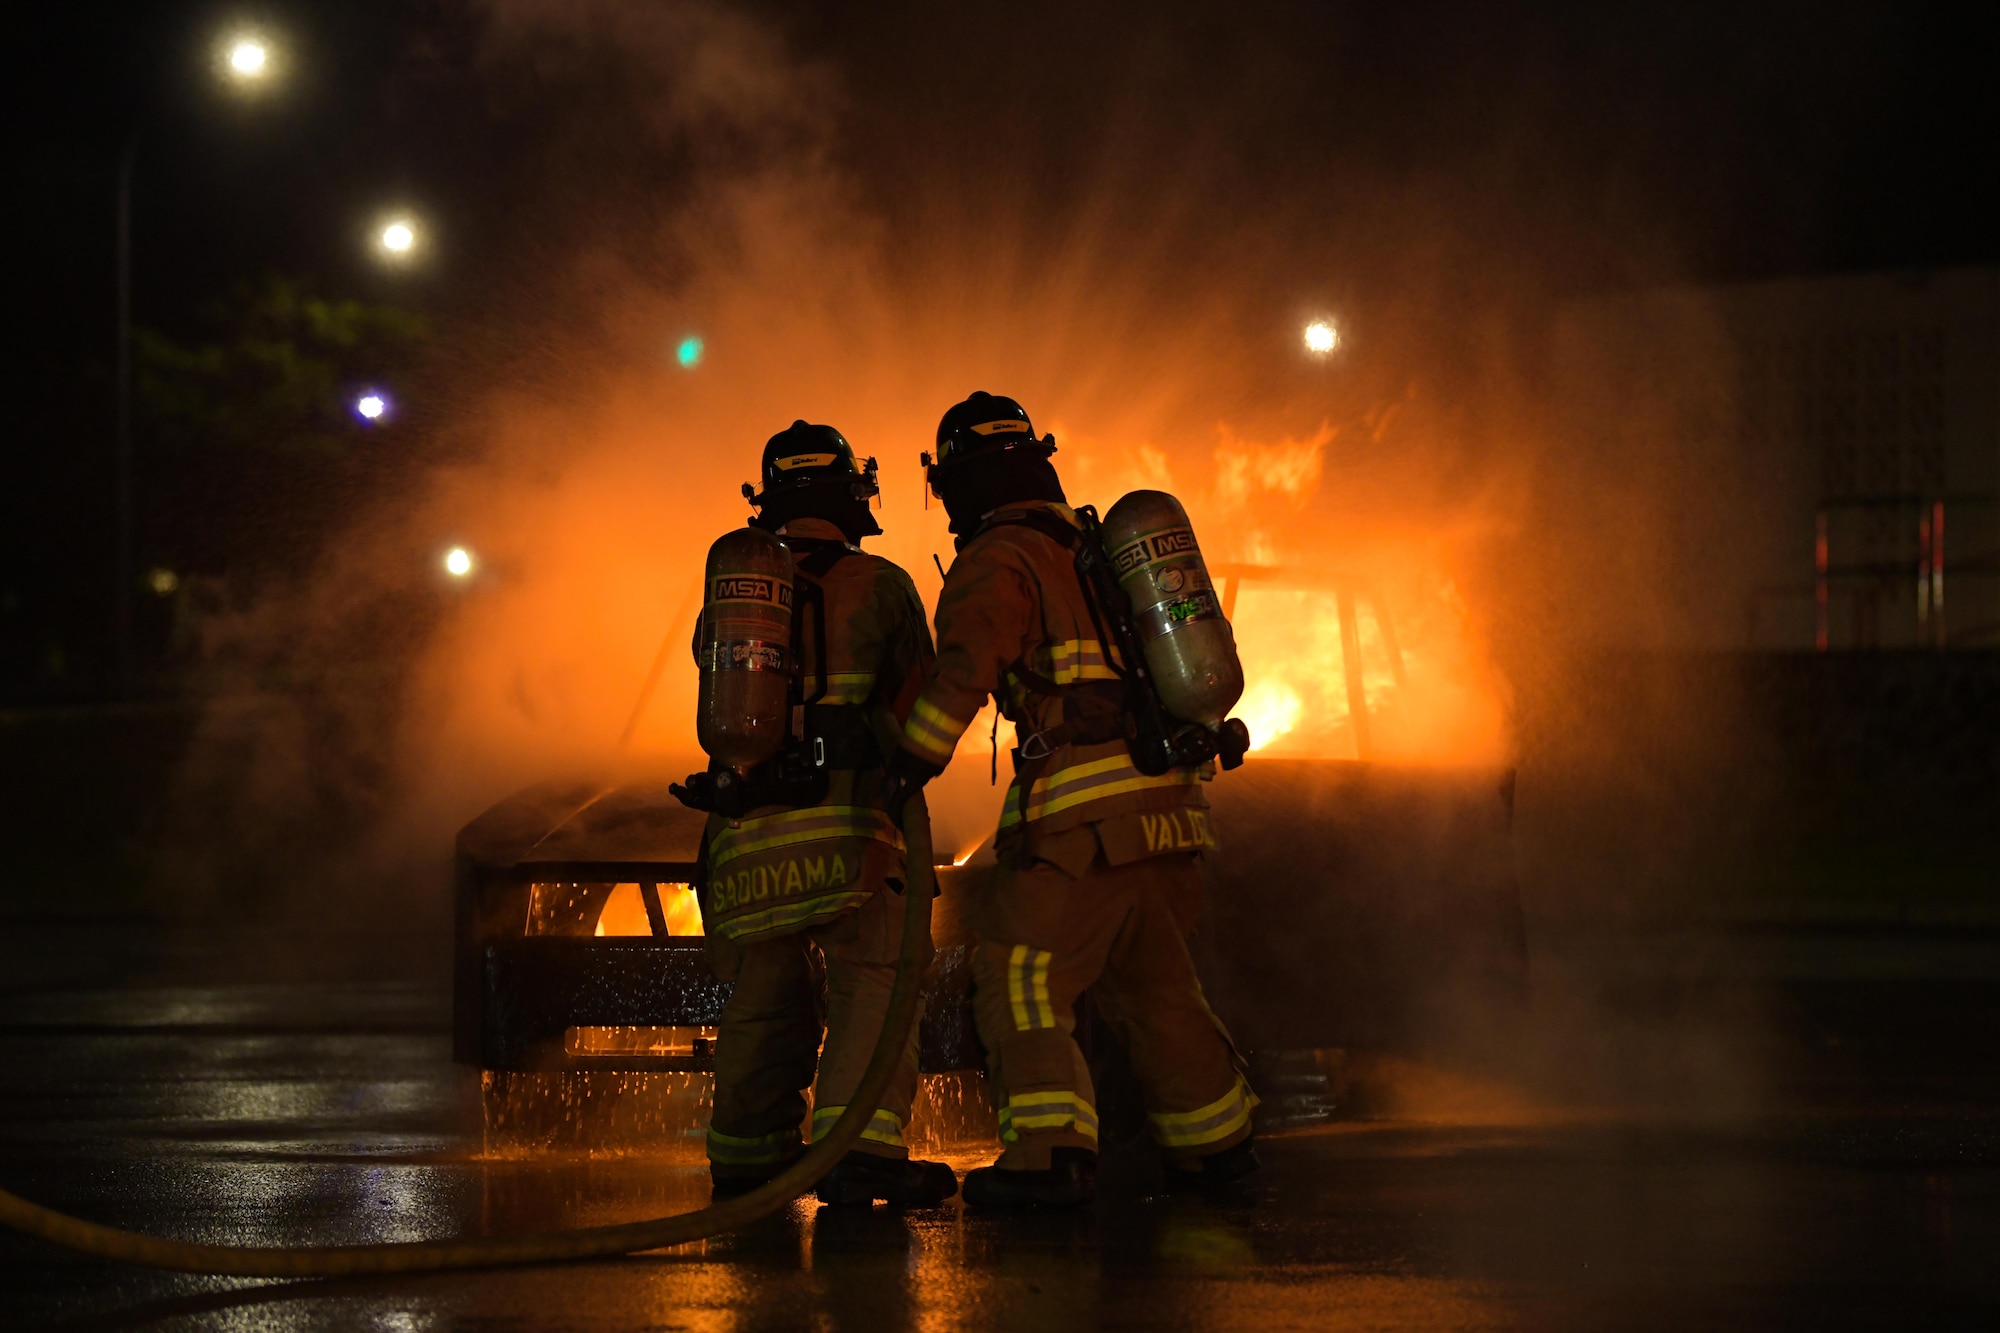 Firefighters extinguish a fire.